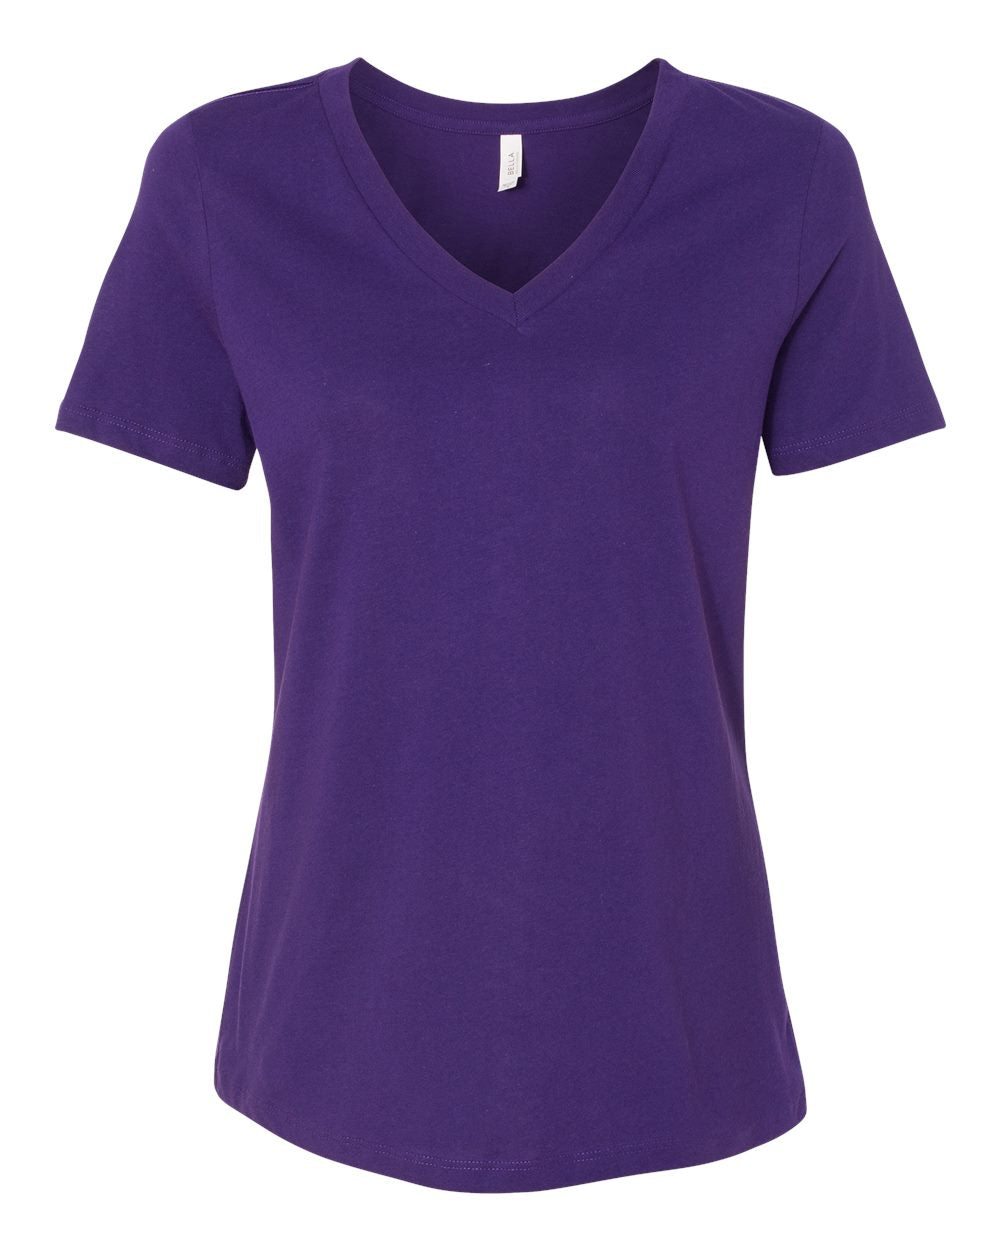 bella+canvas womens relaxed v-neck tee team purple